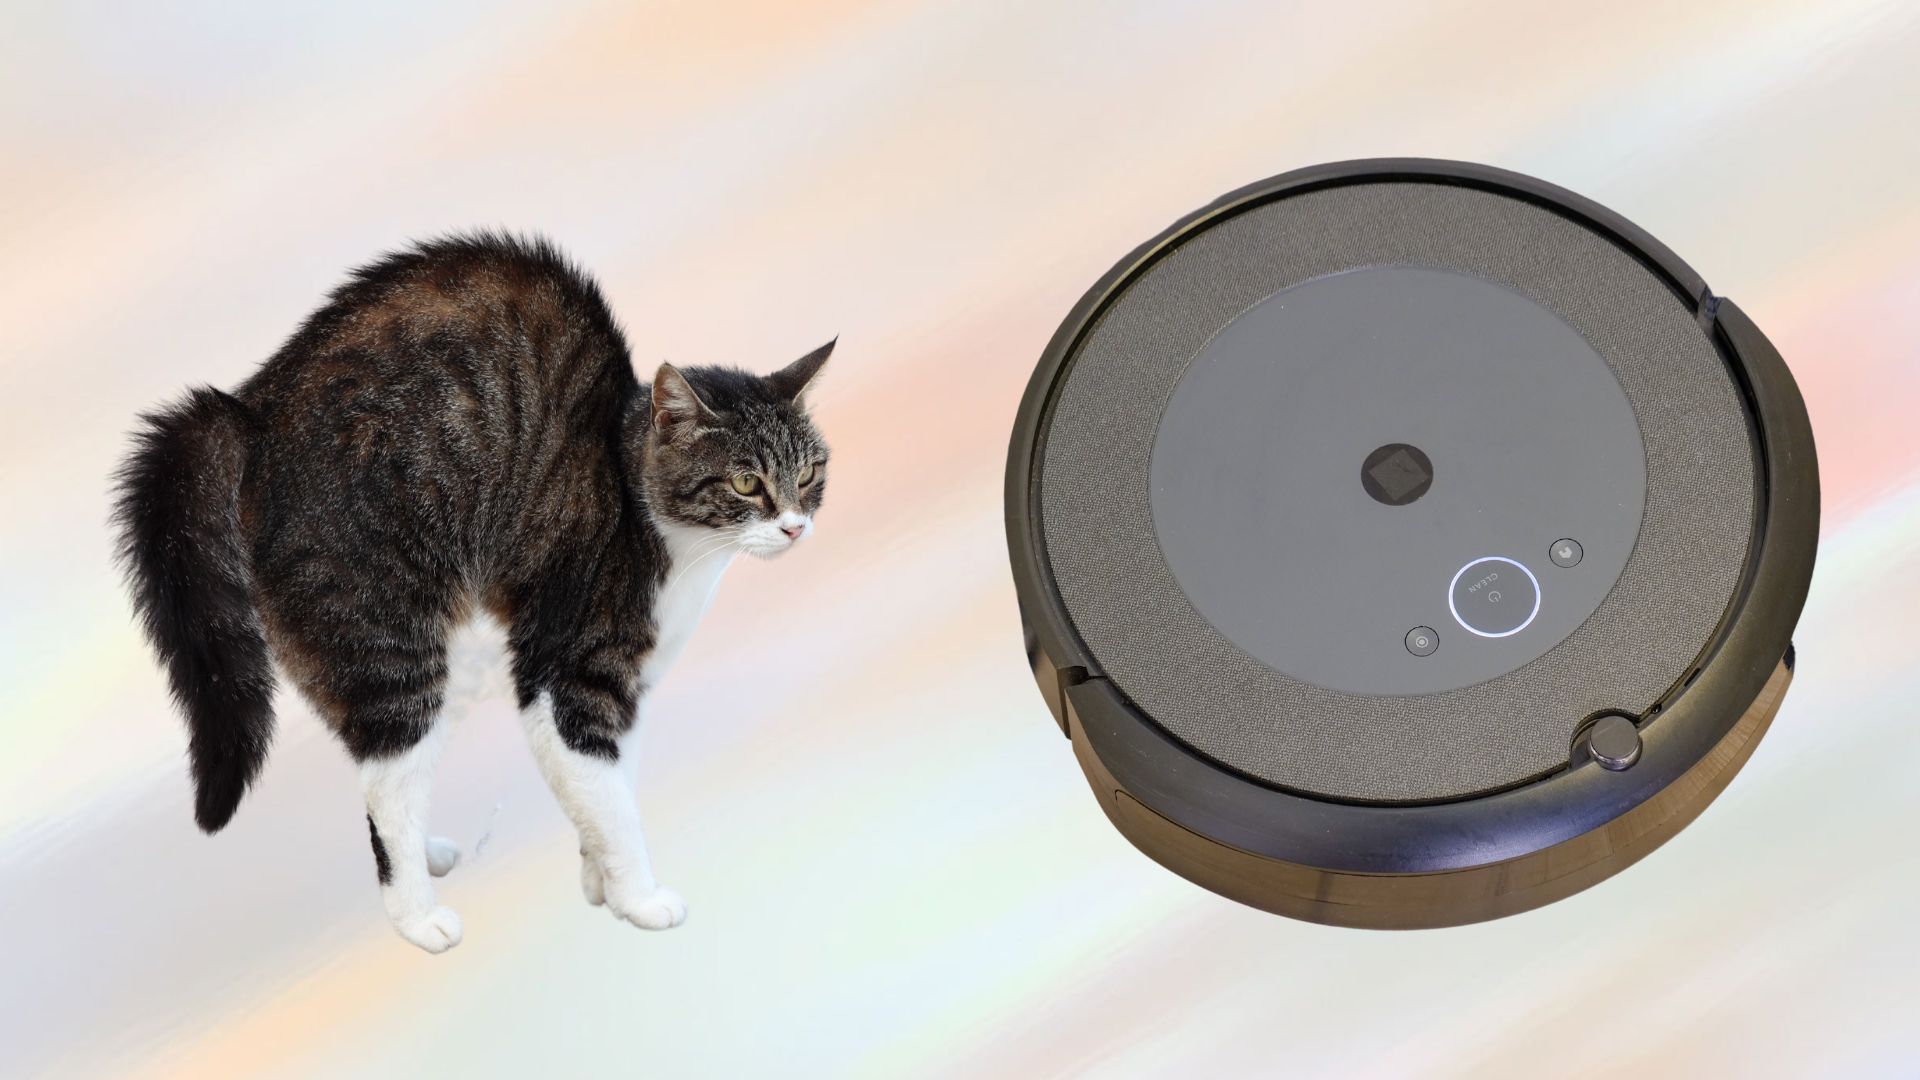 Cats and Are Cats Afraid of Robot Vacuums? TechnoMEOW